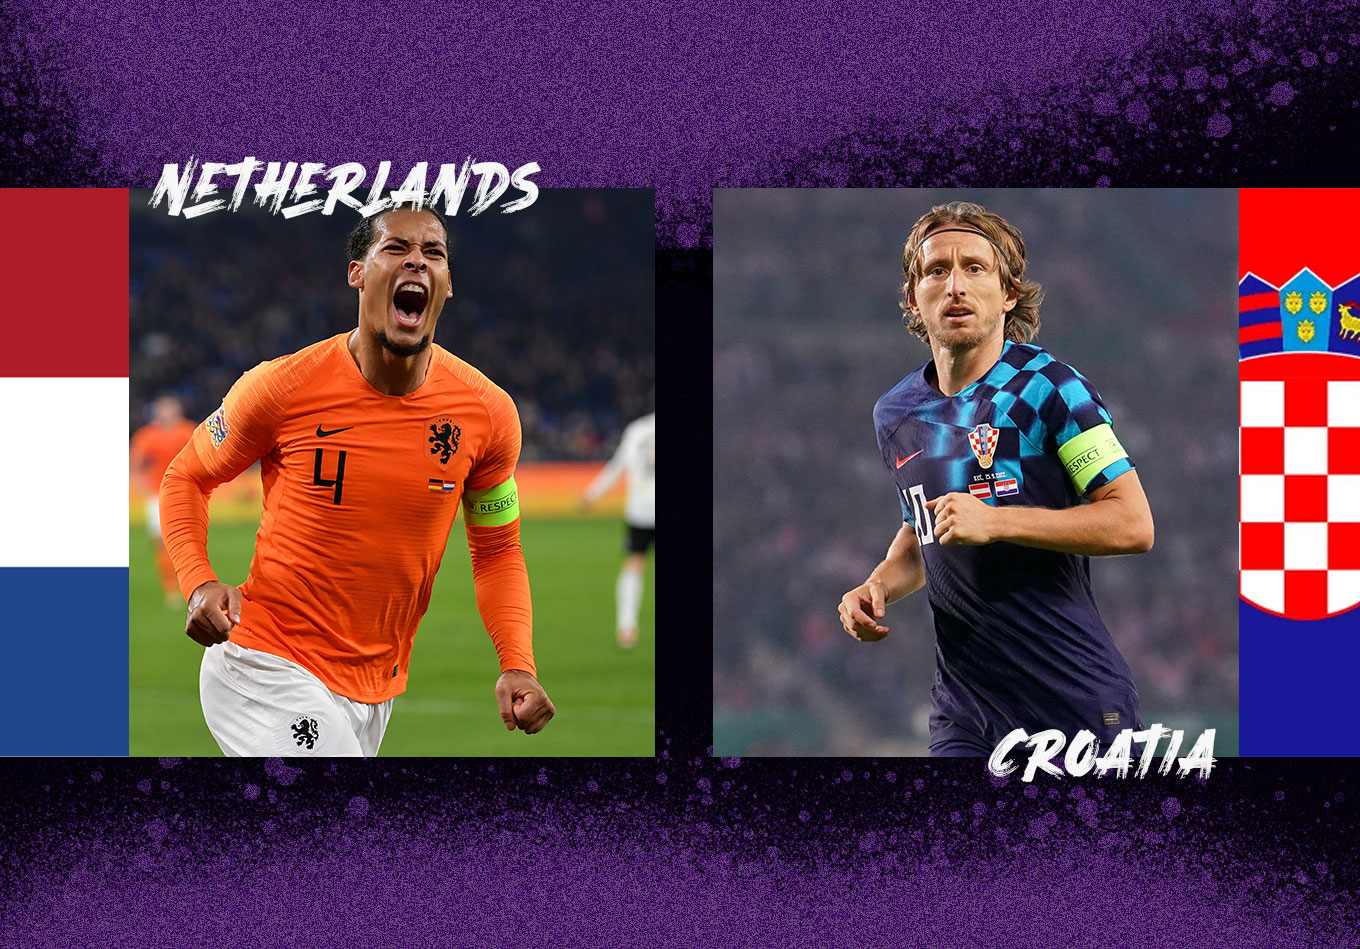 Netherlands vs Croatia: UEFA Nations League Preview and Prediction